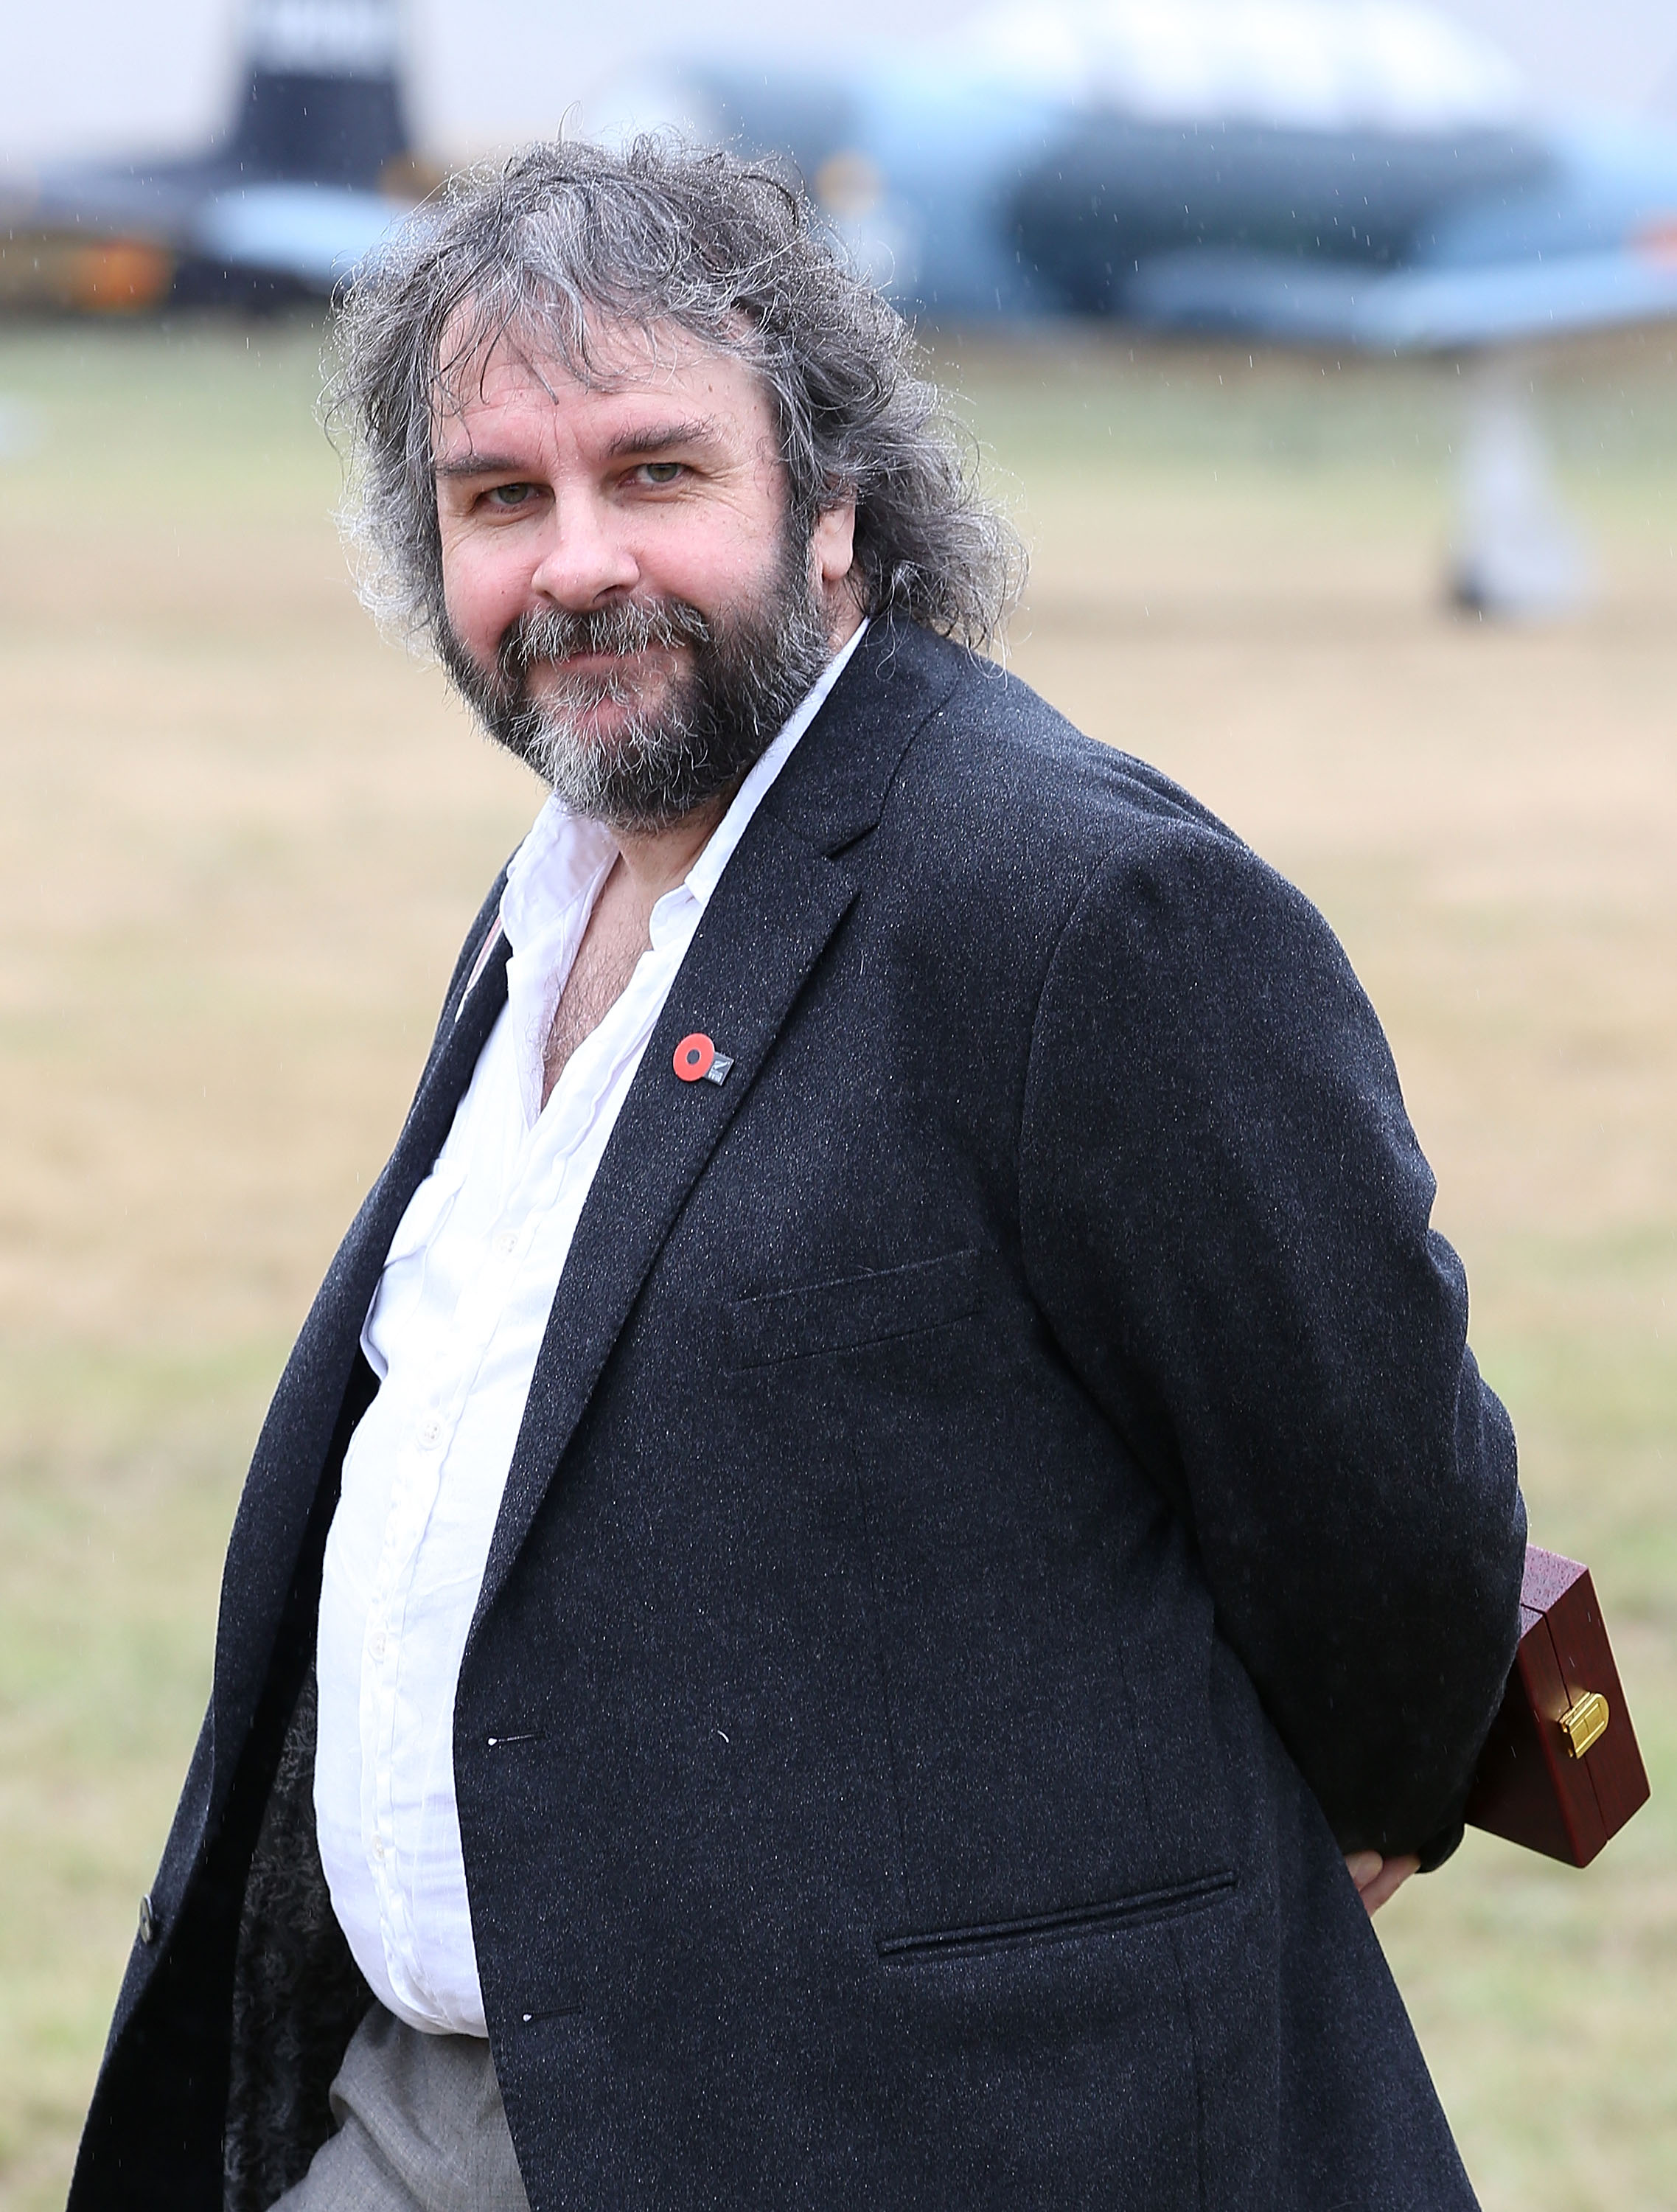 Sir Peter Jackson attends the 'Knights of the Sky' exhibition at Omaka Aviation Heritage Centre in Blenheim on April 10, 2014 in Wellington, New Zealand. (Danny Martindale—WireImage)